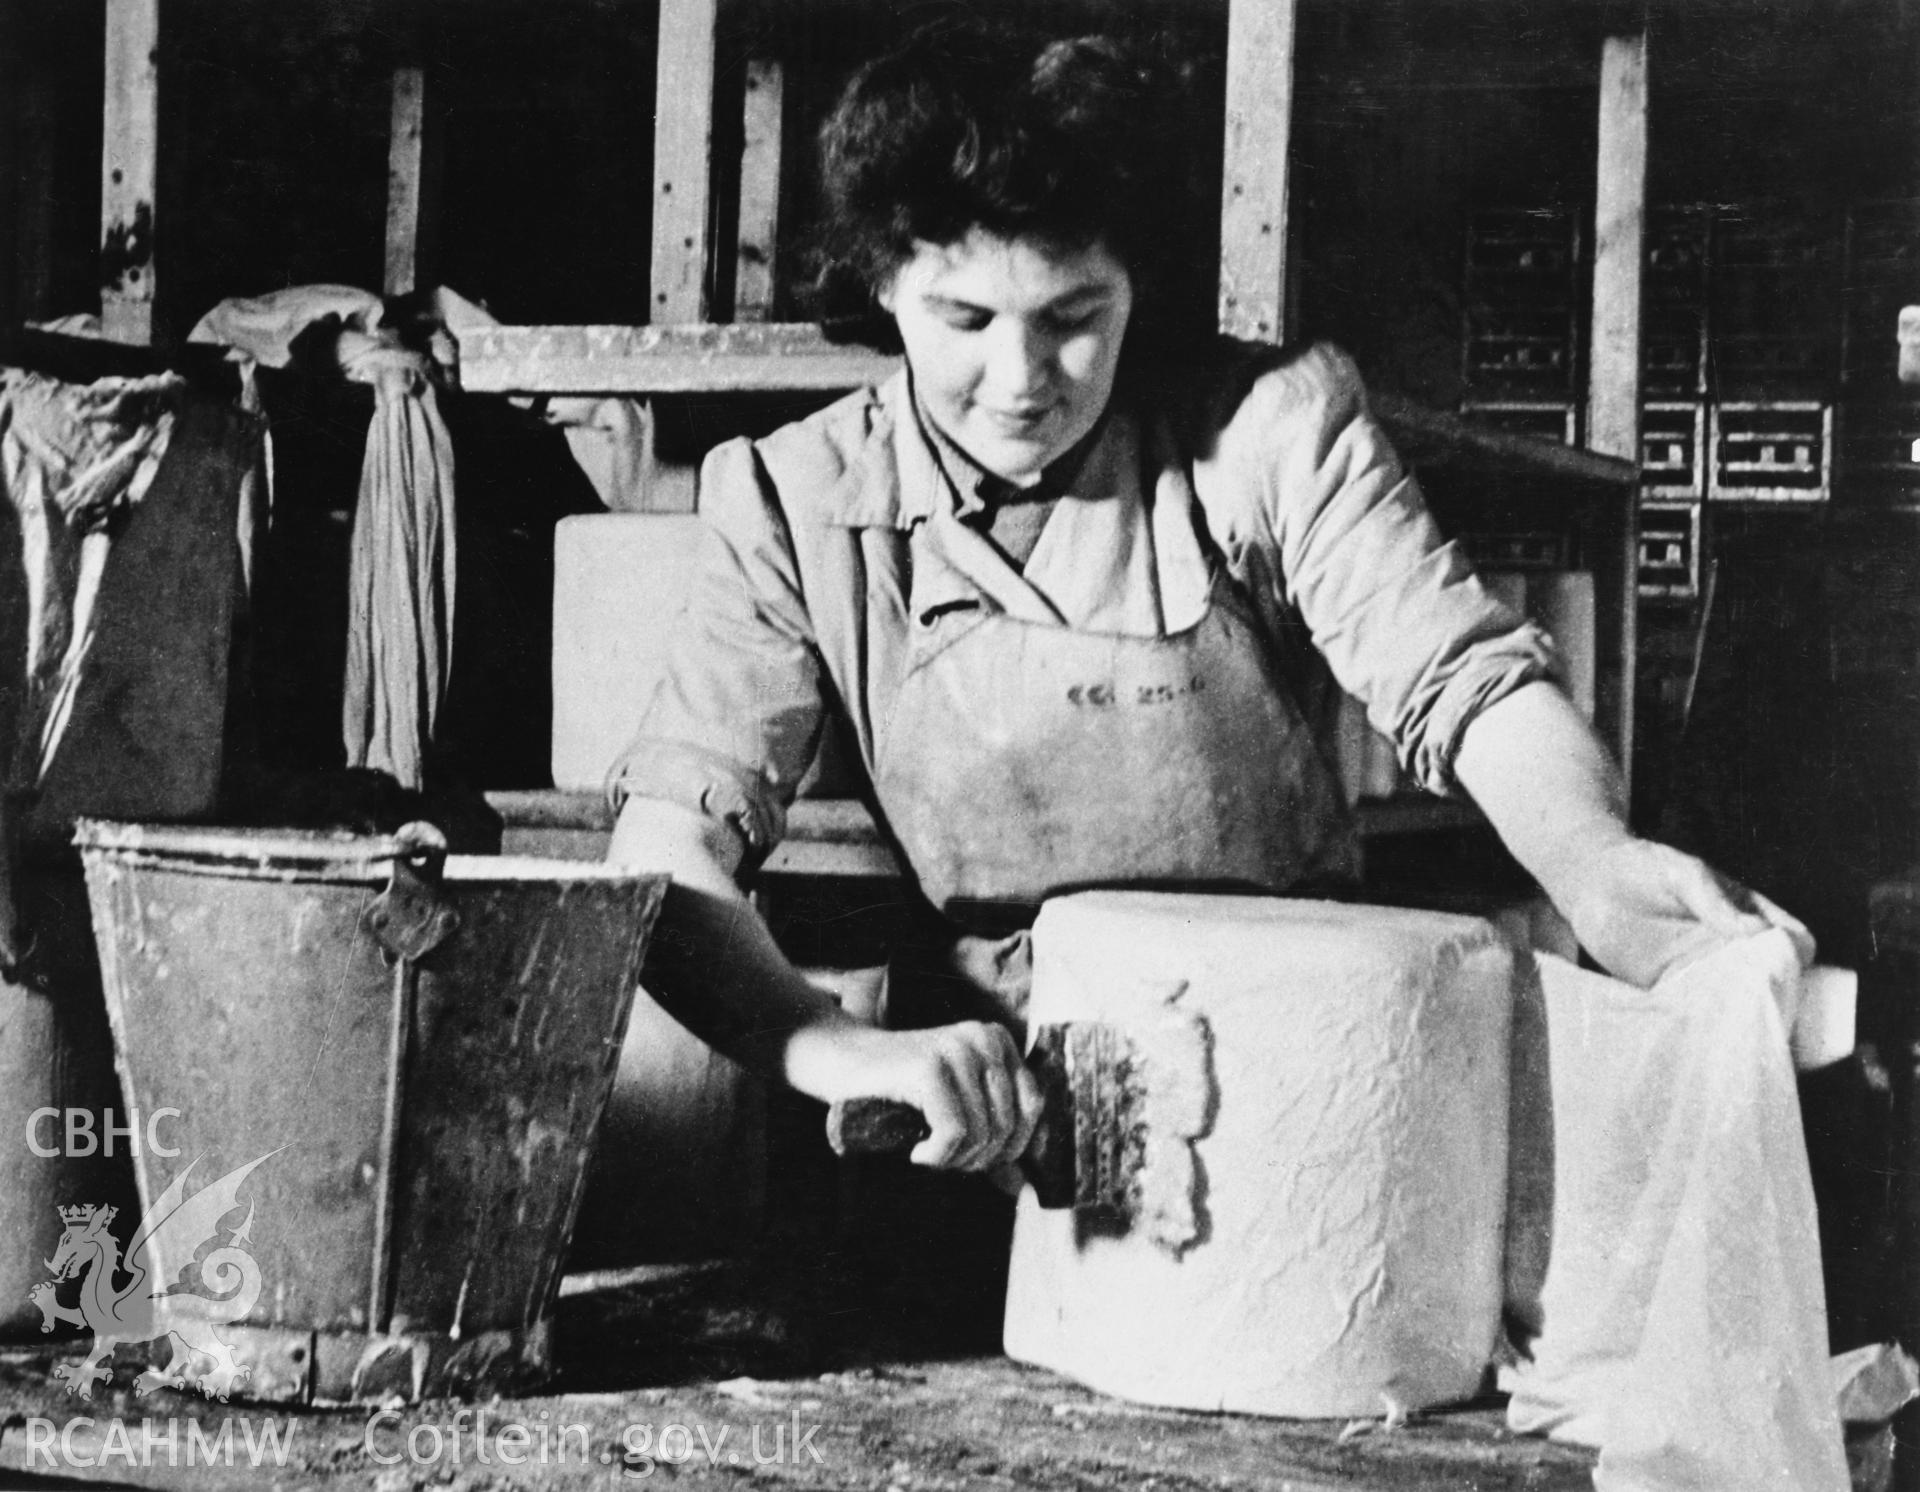 Copy of a pre-1950 photo showing stages of cheese production